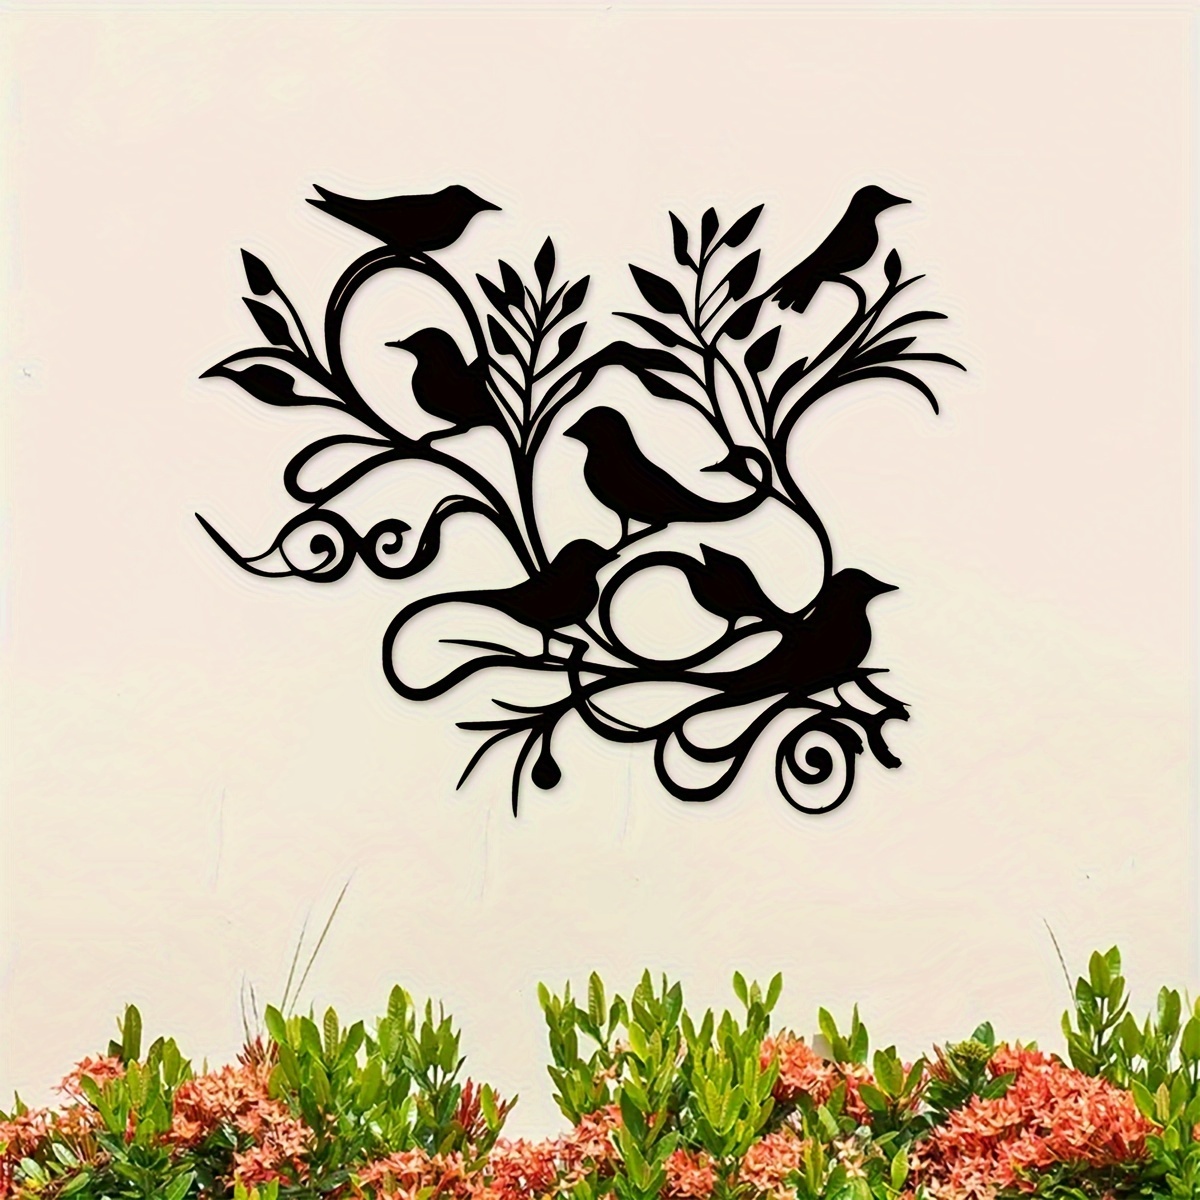 

1pc Arabesque Birds On Branch Sign, Metal Wall Art, Metal Wall Hanging, Unique Home, Home Decor, Suitable For Decorating House, Garden, Patio, Porch, Living Room, Dining Room